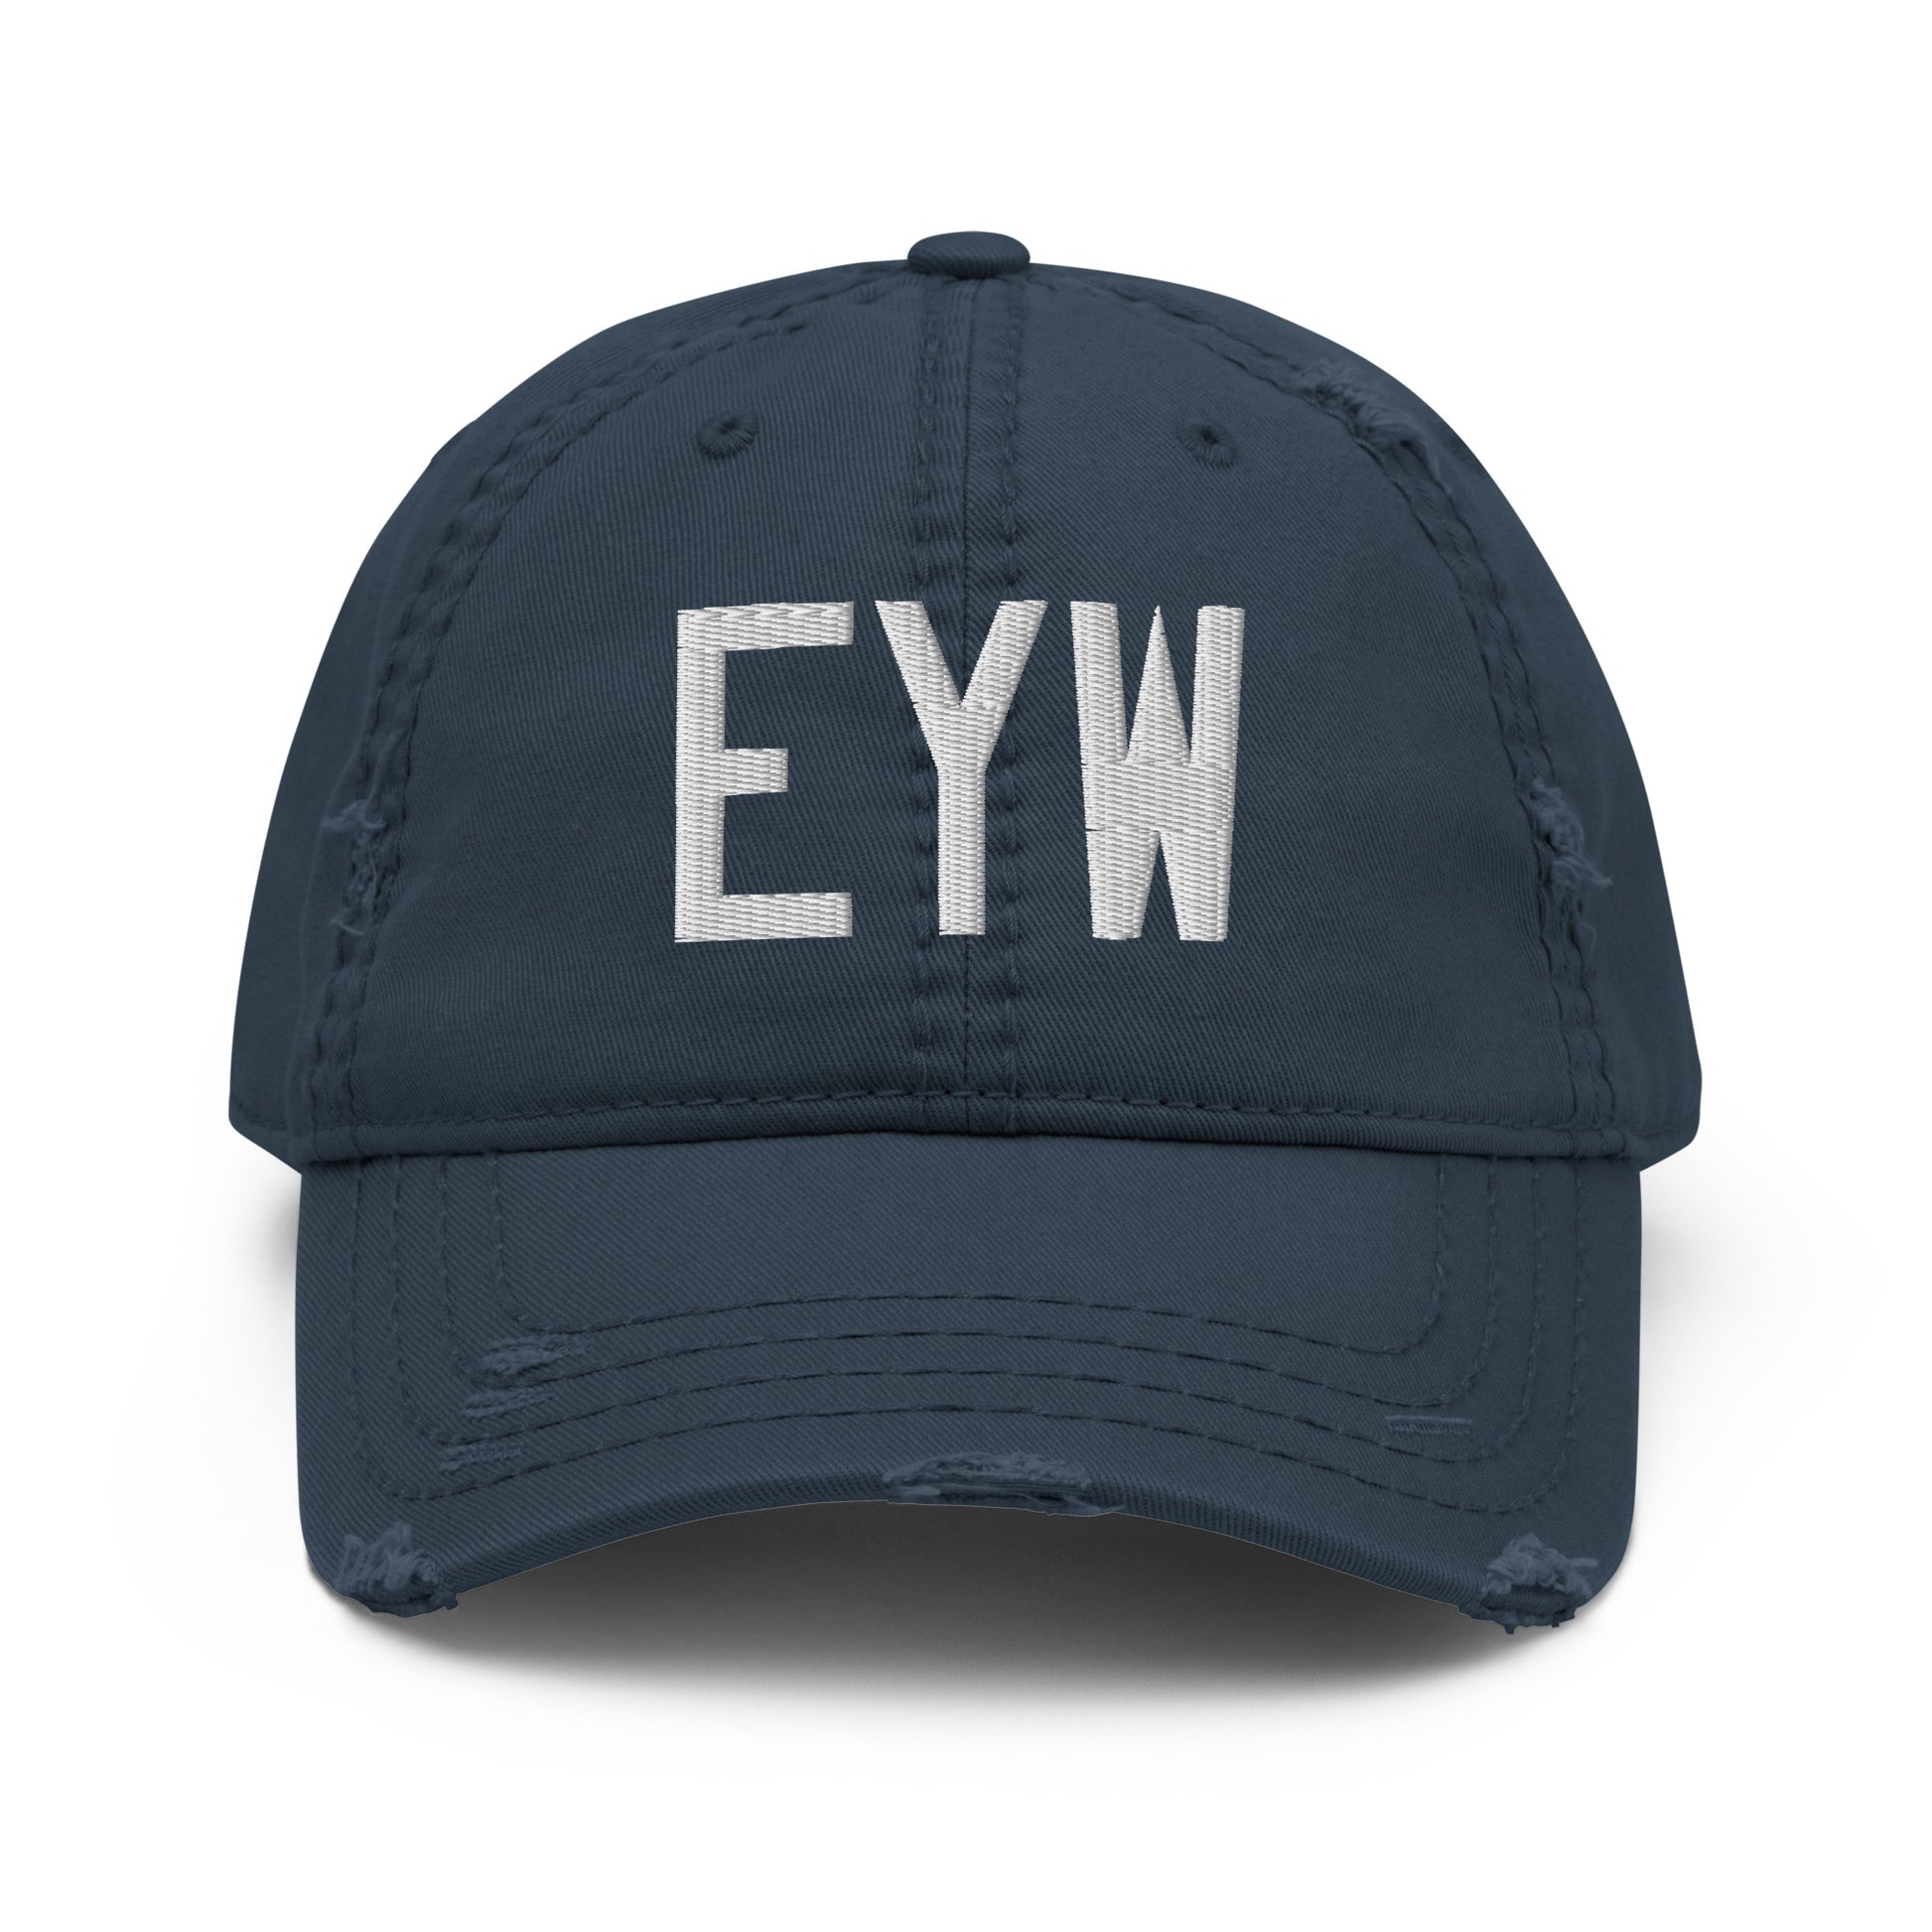 Airport Code Distressed Hat - White • EYW Key West • YHM Designs - Image 13